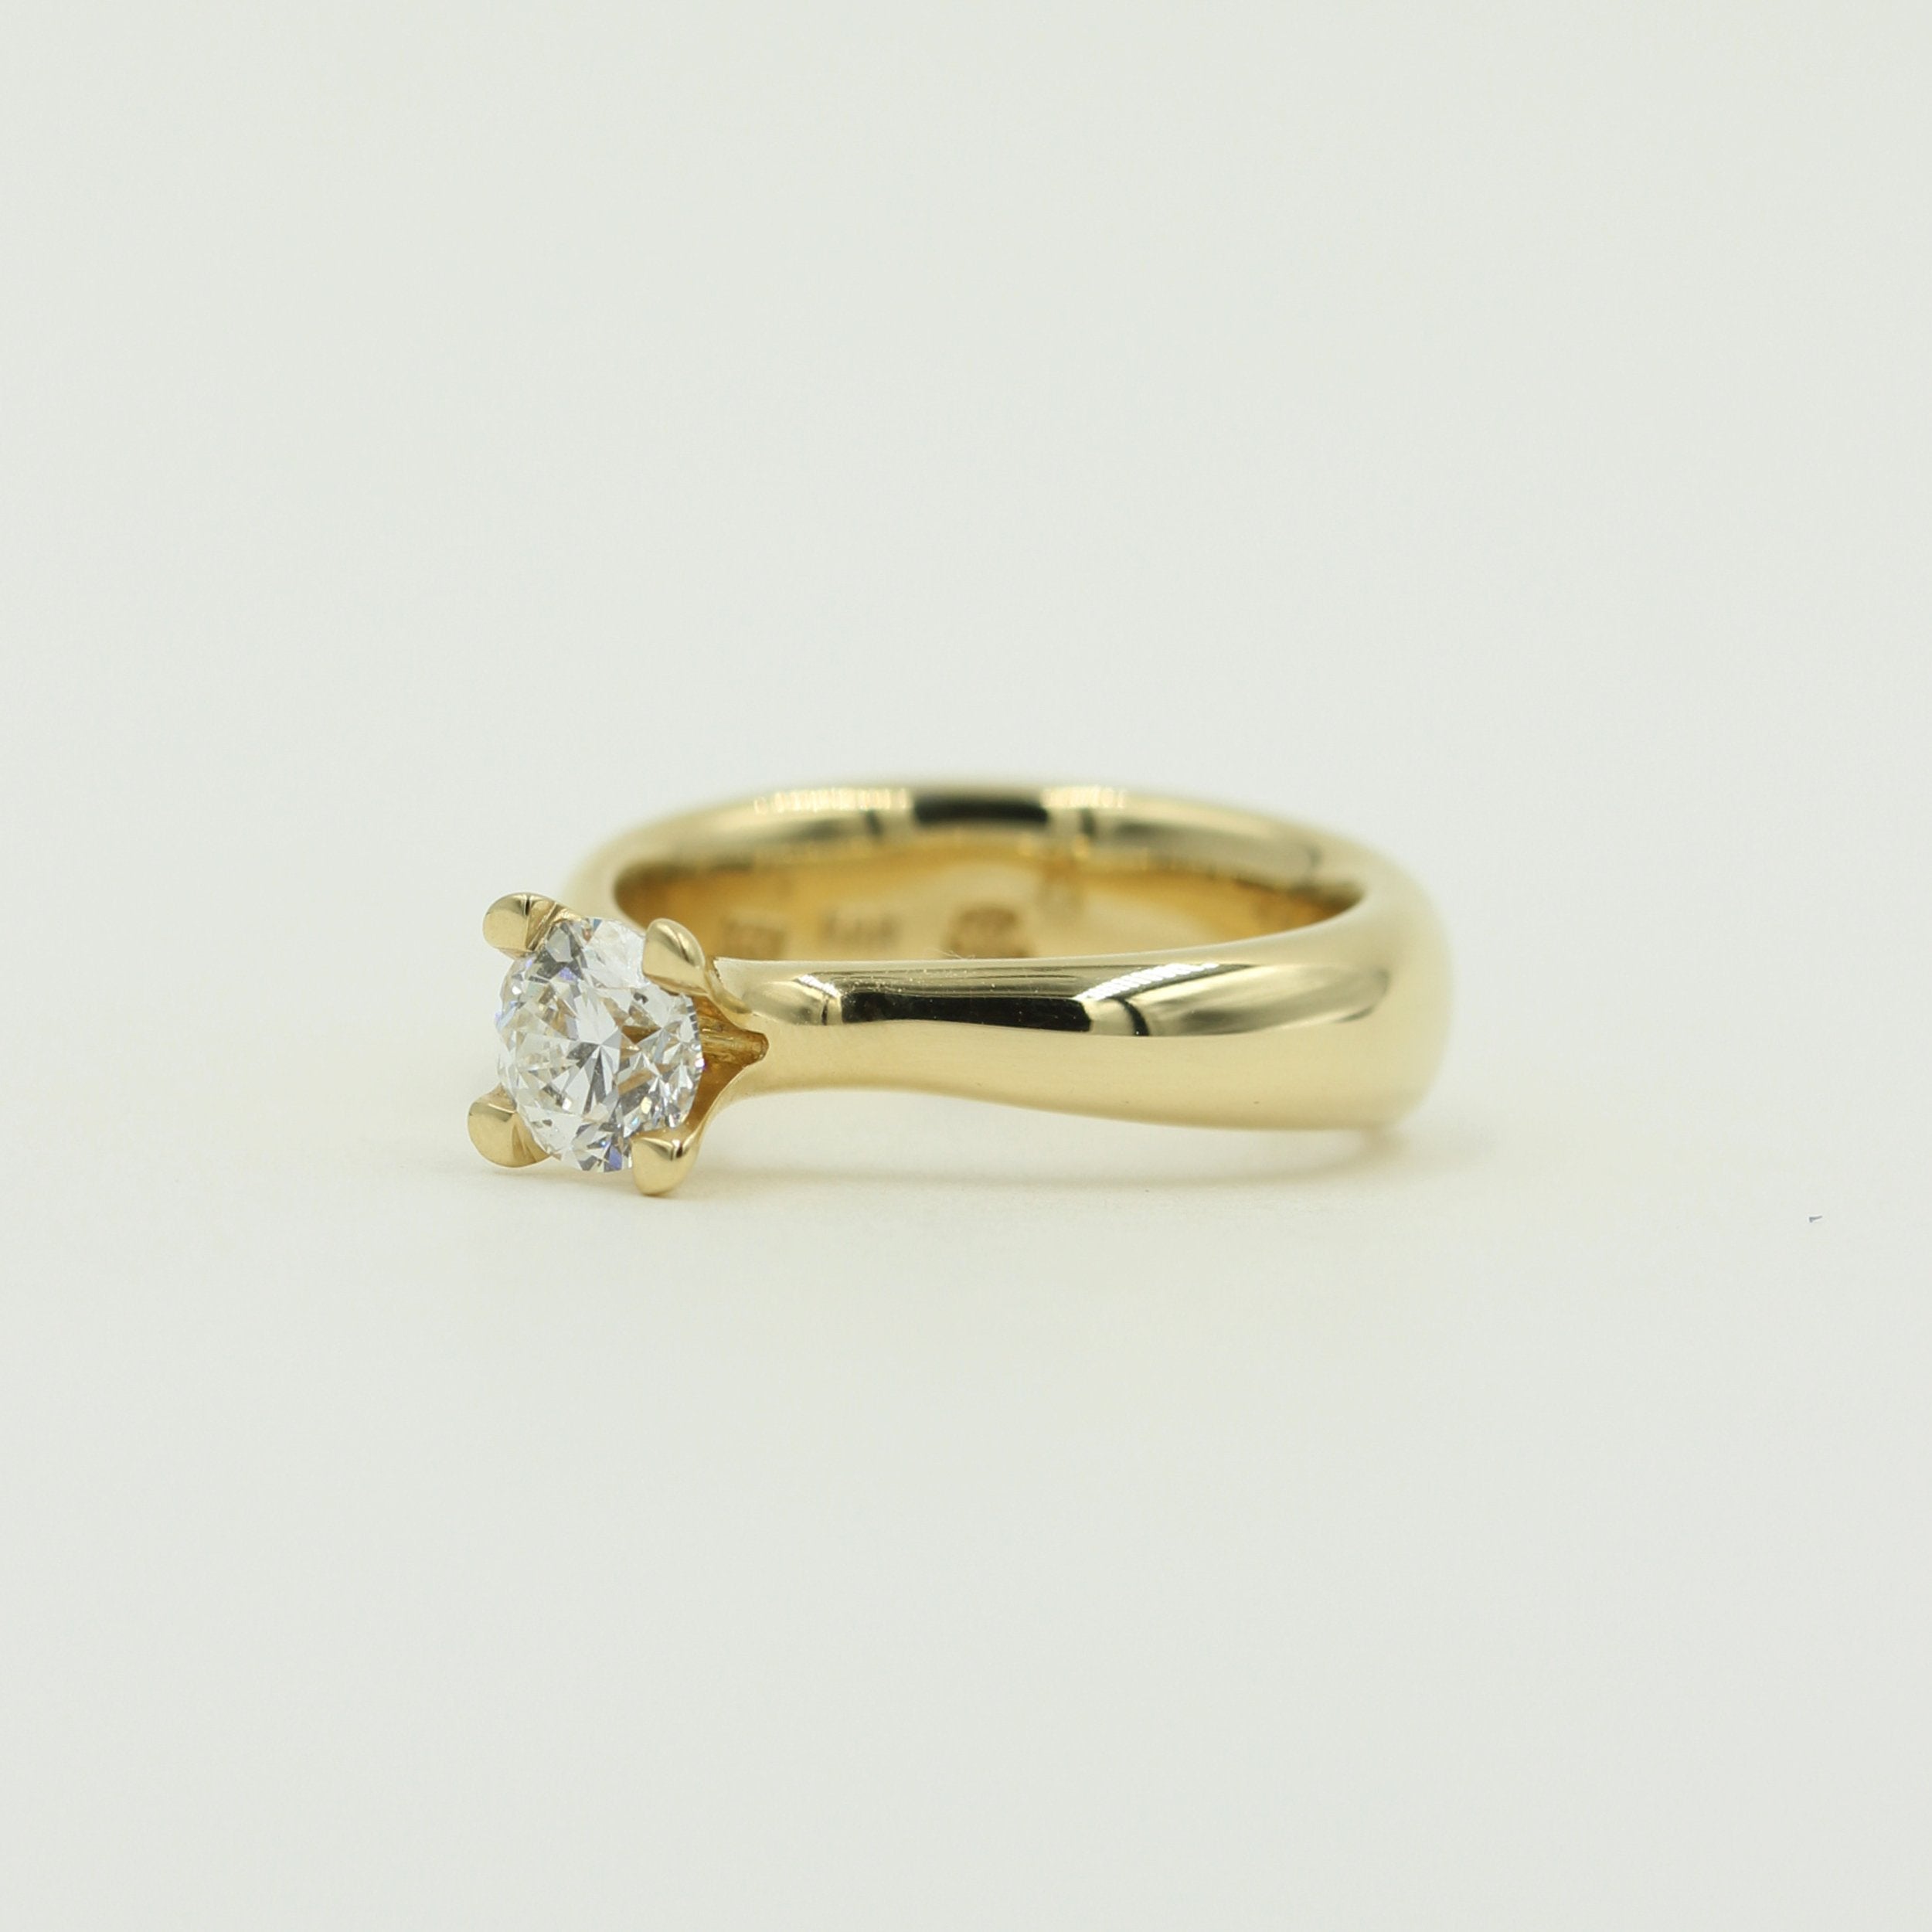 Solitairering m. 0,90 ct. E.SI1